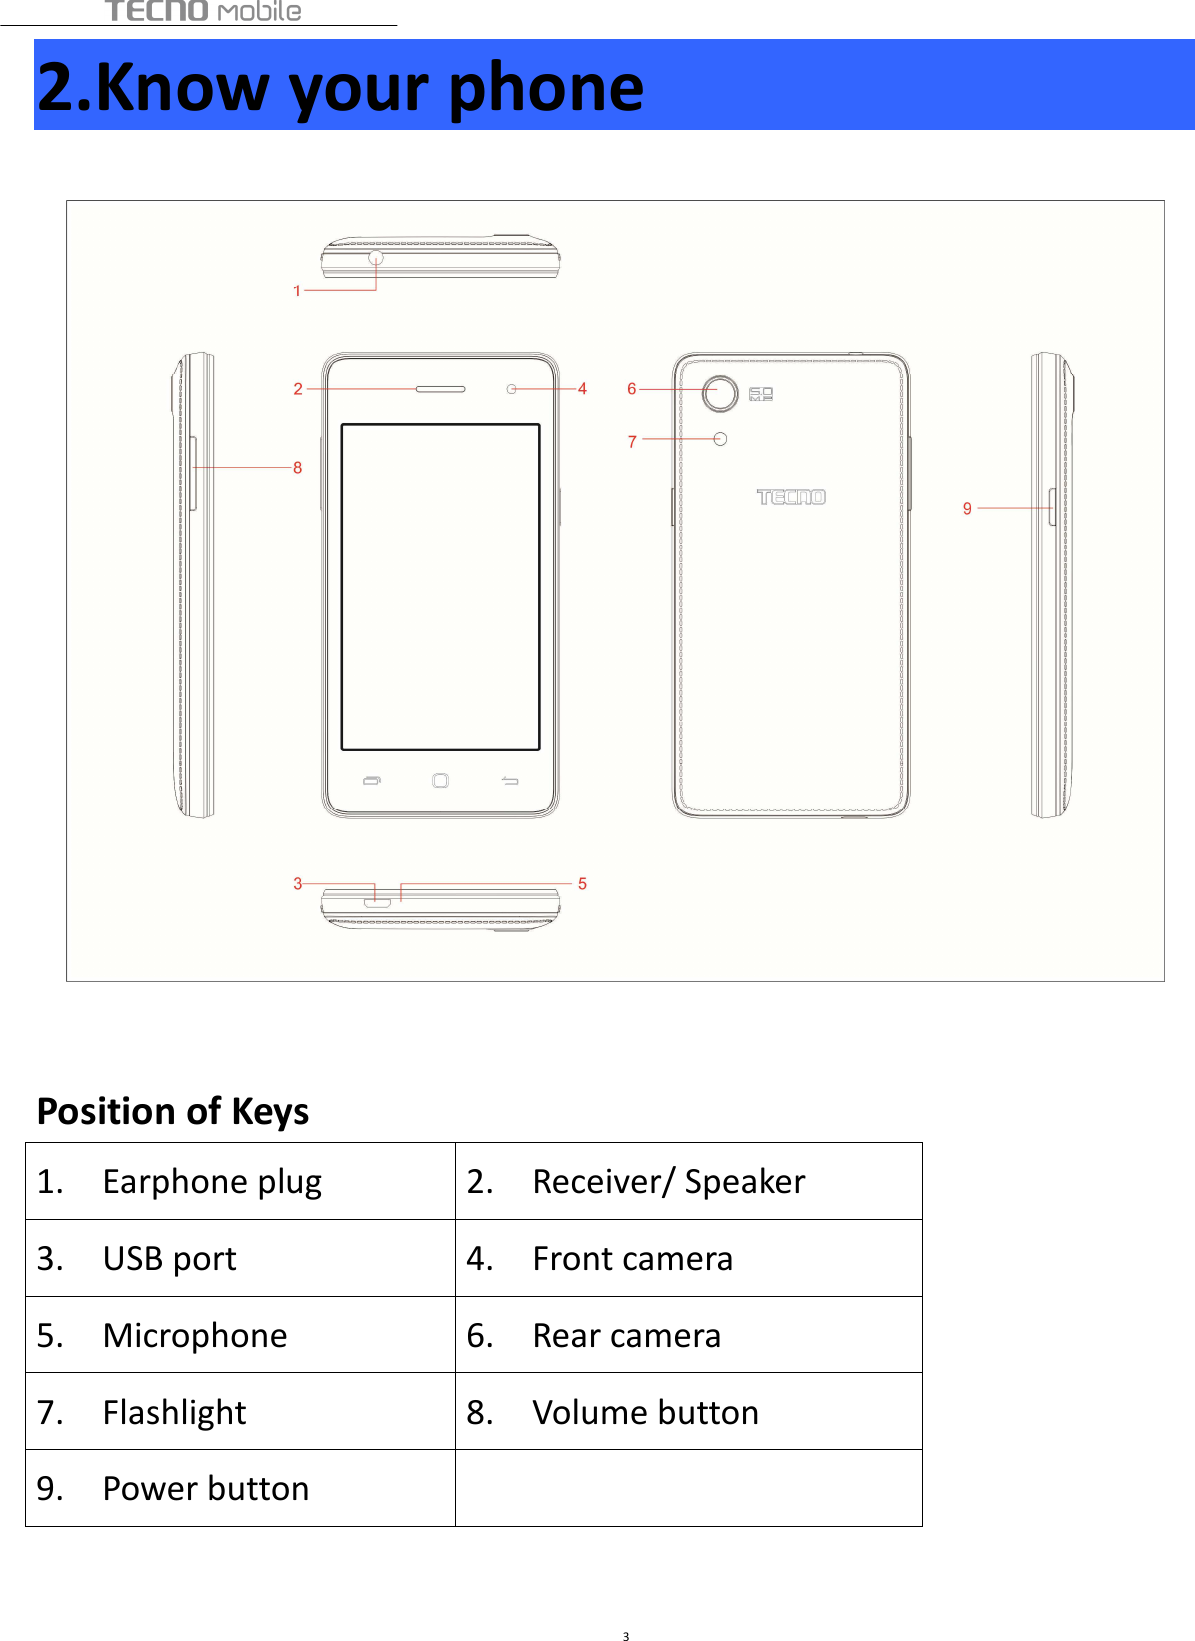  3 2.Know your phone    Position of Keys  1.    Earphone plug 2.    Receiver/ Speaker 3.    USB port      4.    Front camera   5.    Microphone 6.    Rear camera    7.    Flashlight    8.    Volume button 9.    Power button     